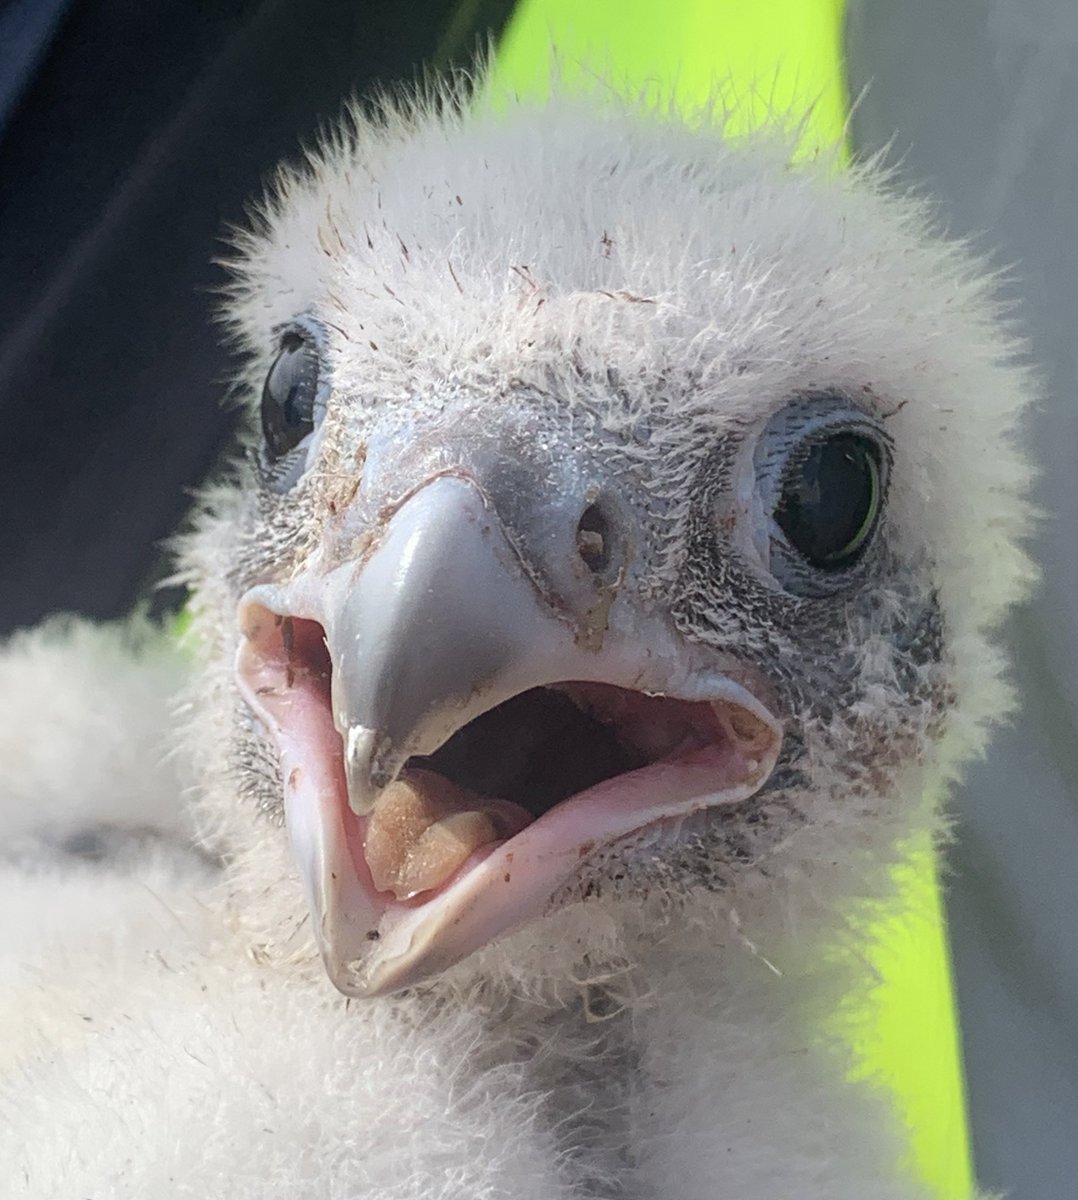 What a day! Peregrines visited for ringing in Staffordshire, finding 4 very healthy chicks. Colour rings fitted and returned safely. Incredible experience and a privilege @_BTO this site has now fledged 35 chicks since 2014.